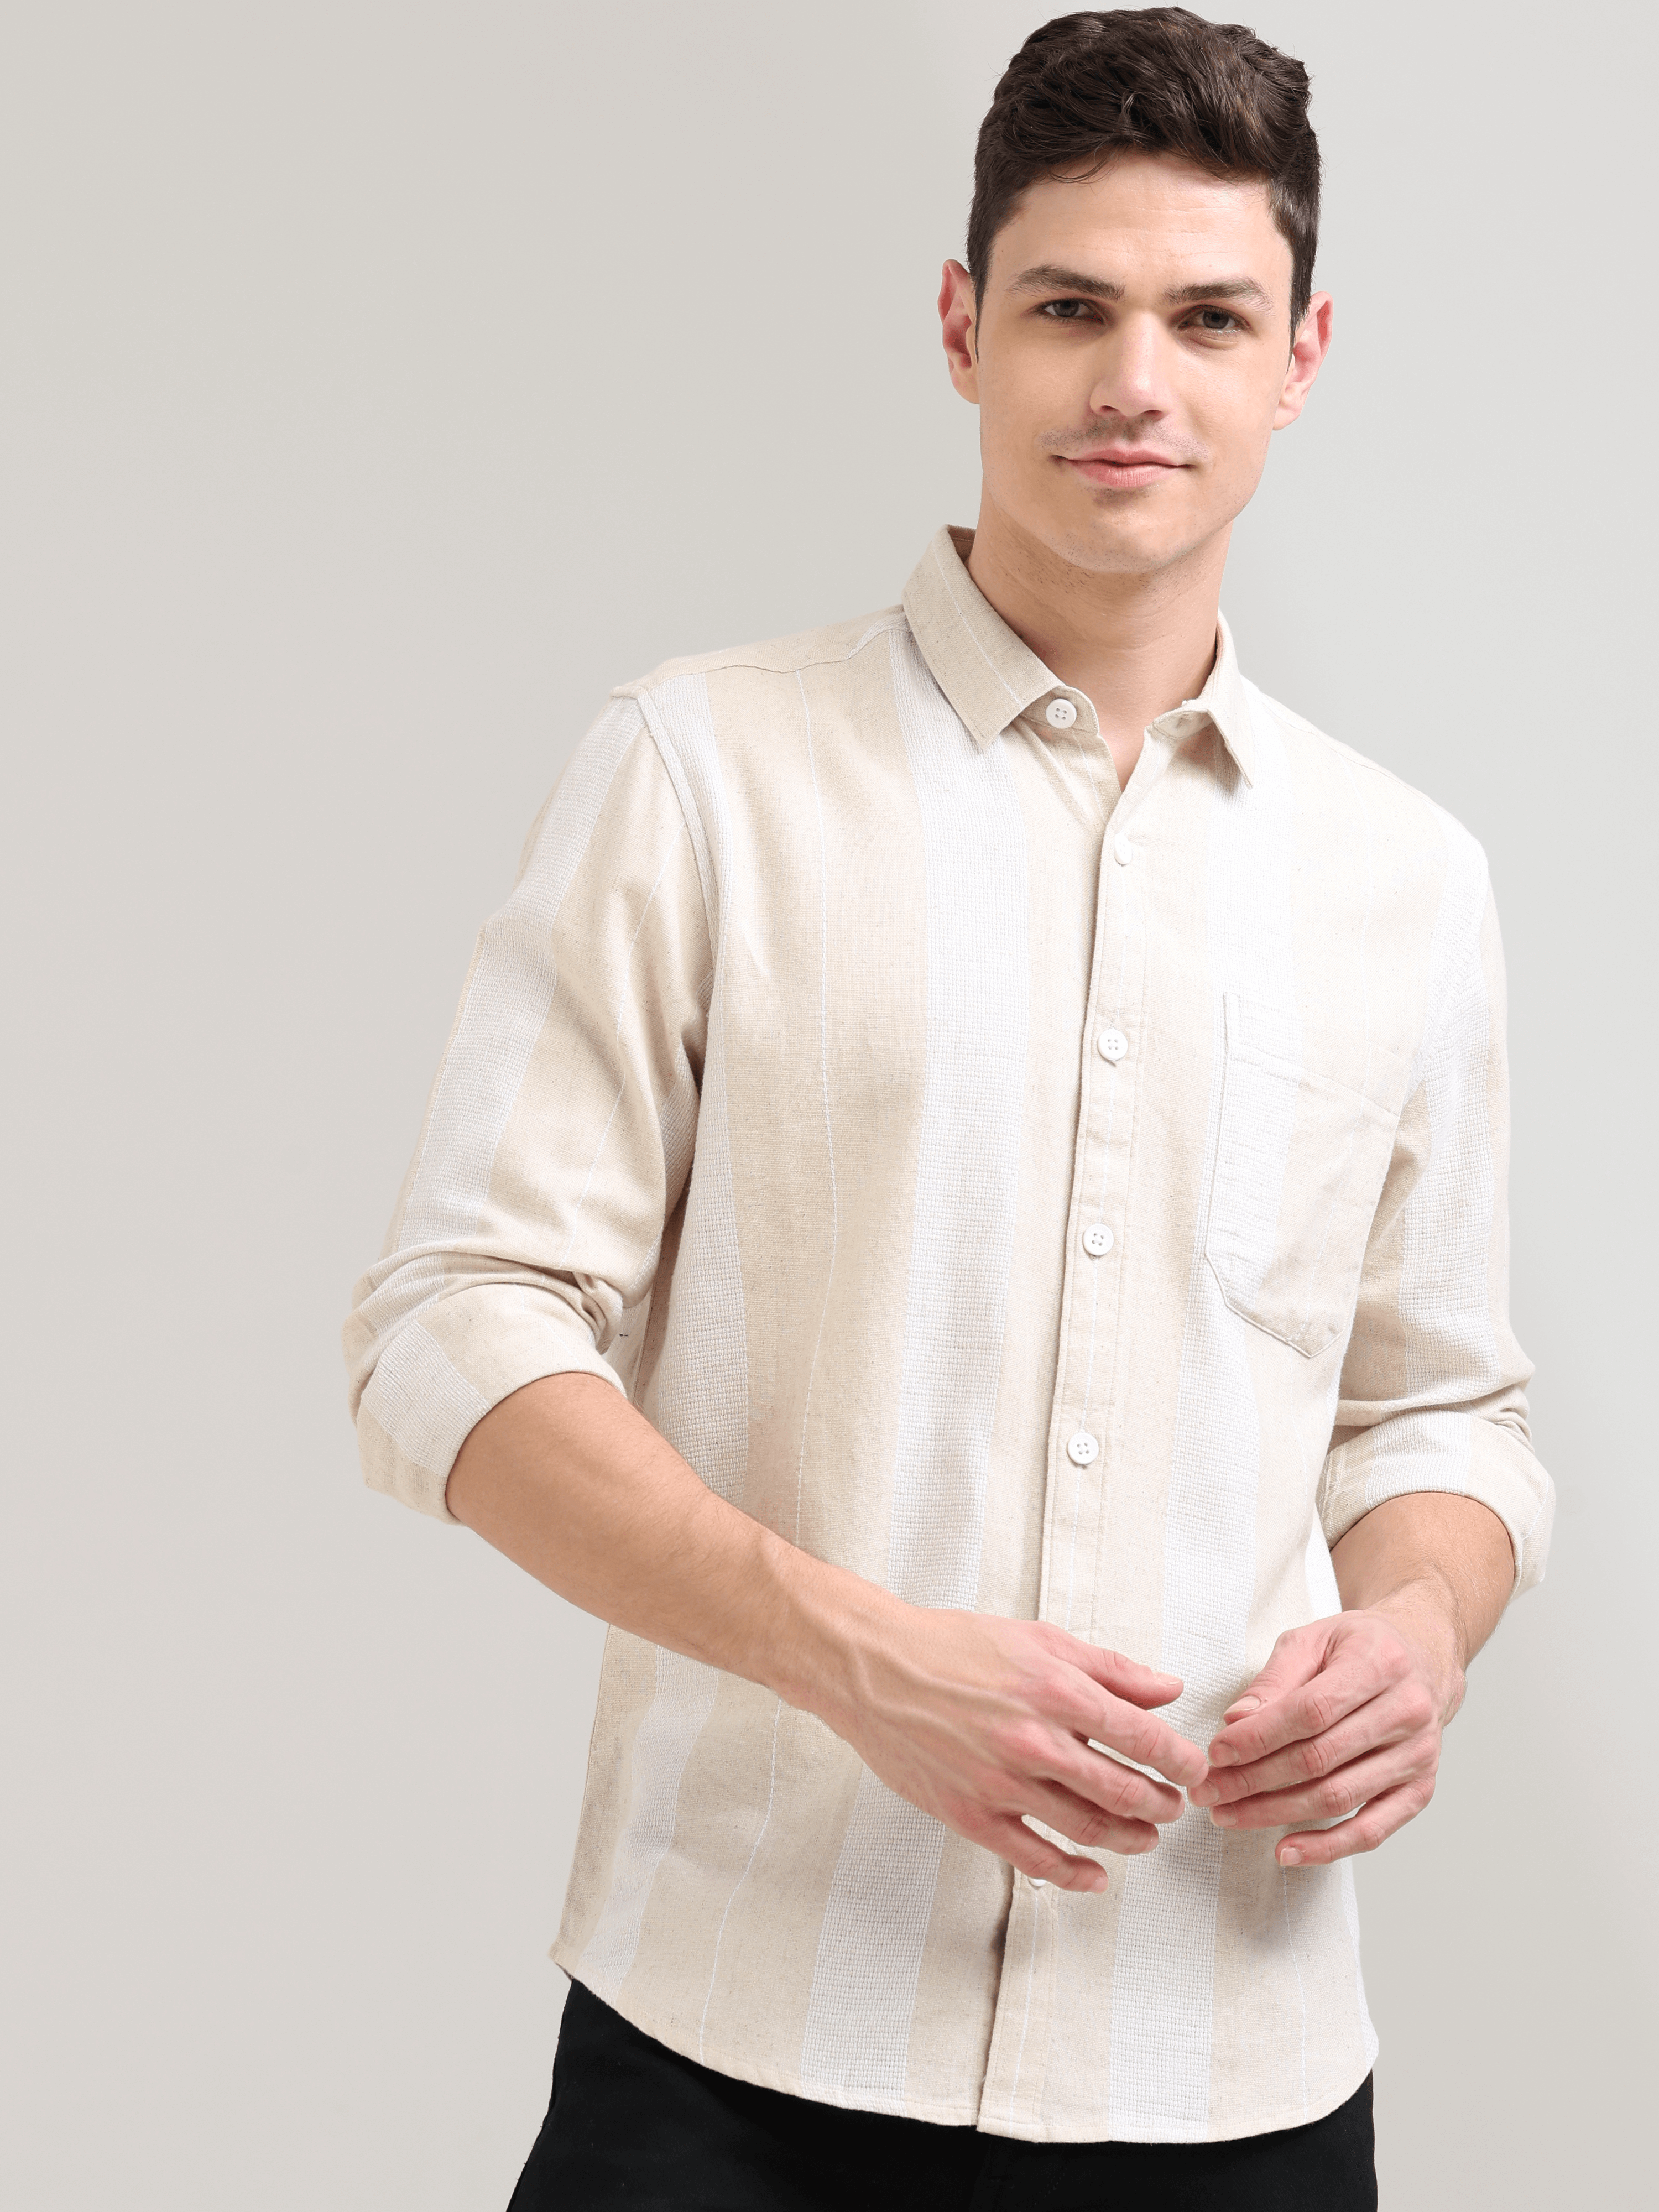 Pure cotton cream&white Casual shirt shop online at Estilocus. 100% Pure Cotton 90% LESS WATER USAGE LOWER CARBON EMISSION NO HARMFUL DYES ON YOUR SKIN NO SYNTHETIC PESTICIDES IN OUR SOIL • Full-sleeve check shirt• Cut and sew placket• Regular collar• Dou